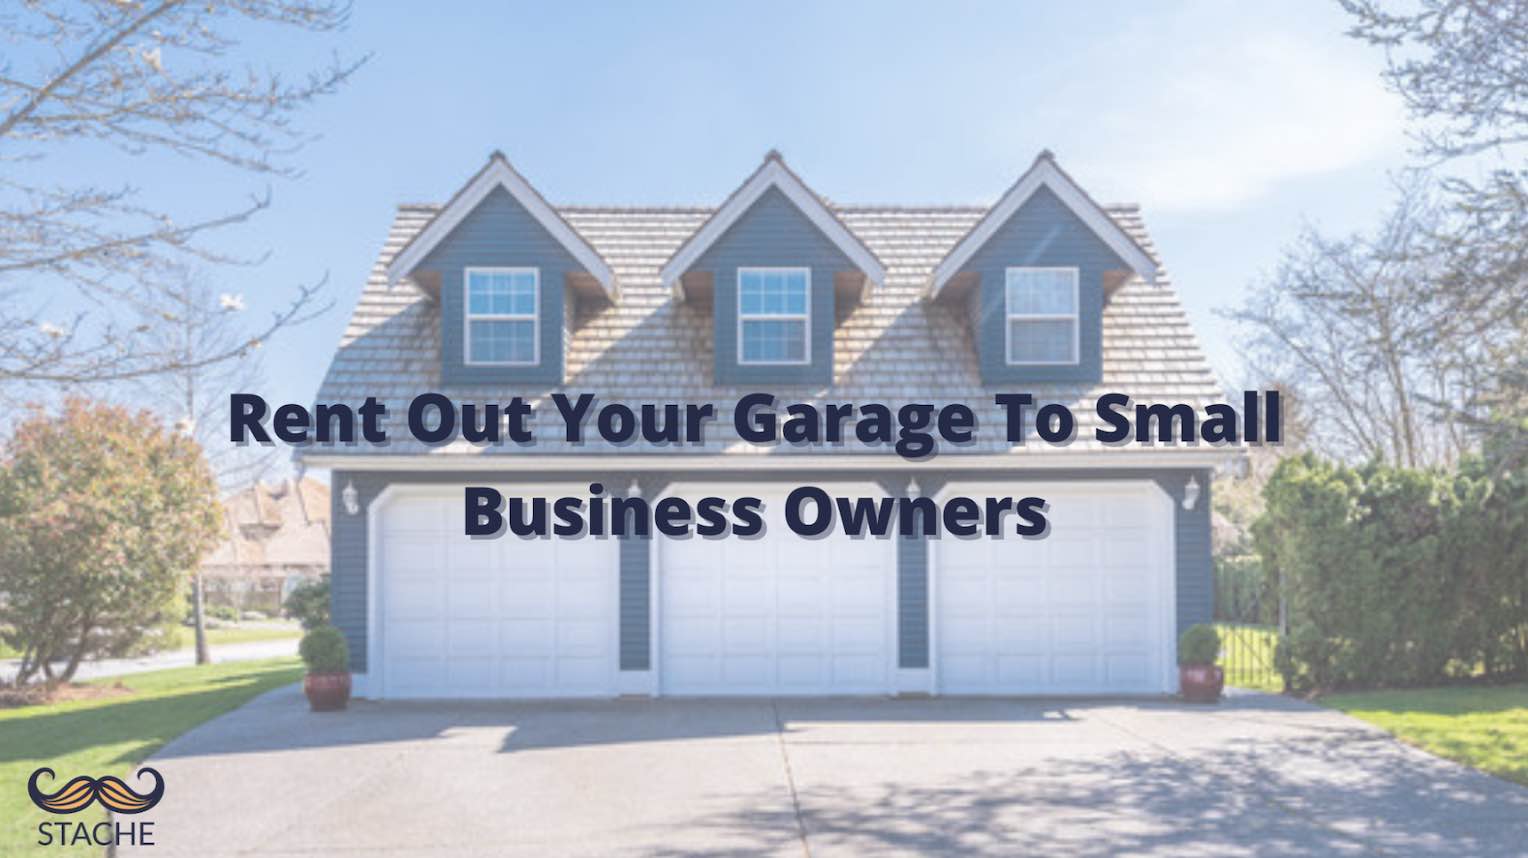 Rent your garage to small business owners